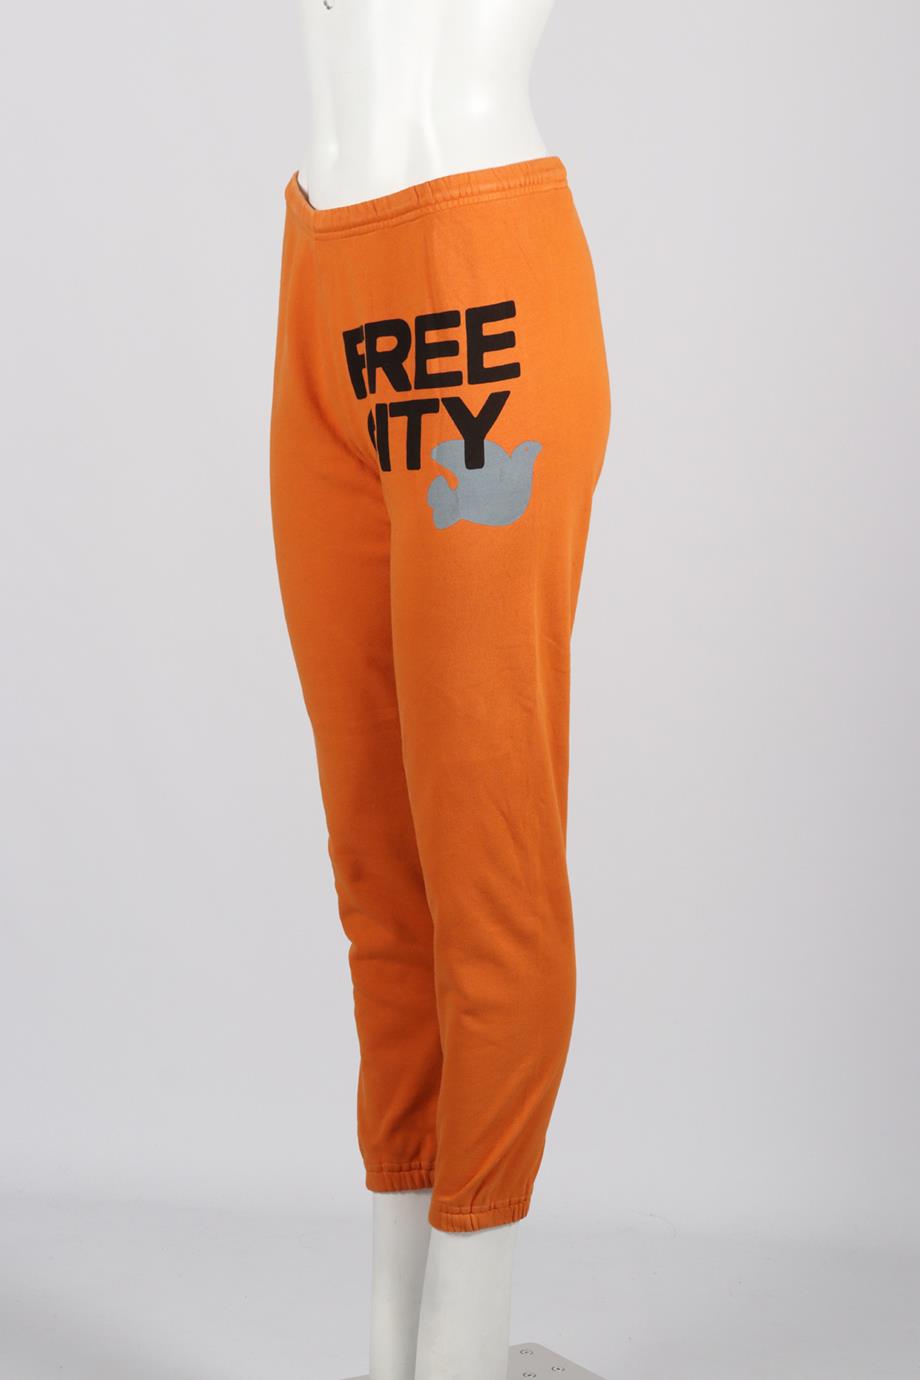 FREE CITY PRINTED COTTON TRACK PANTS SMALL